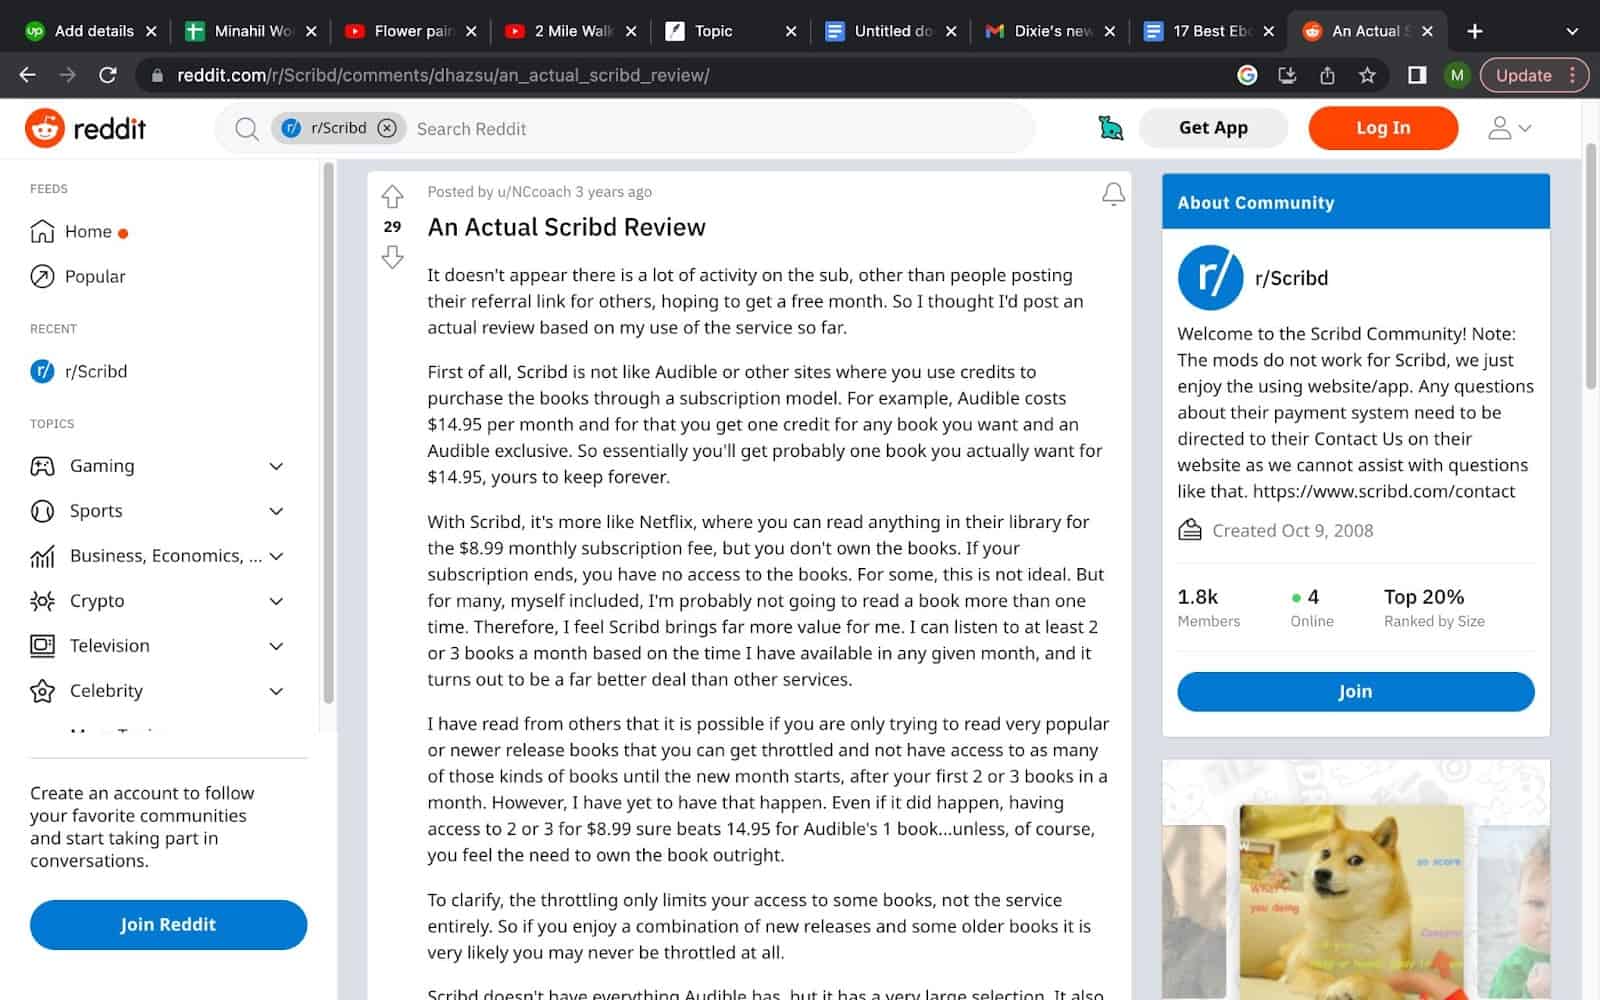 Elaborative review by a customer of Scribd on reddit